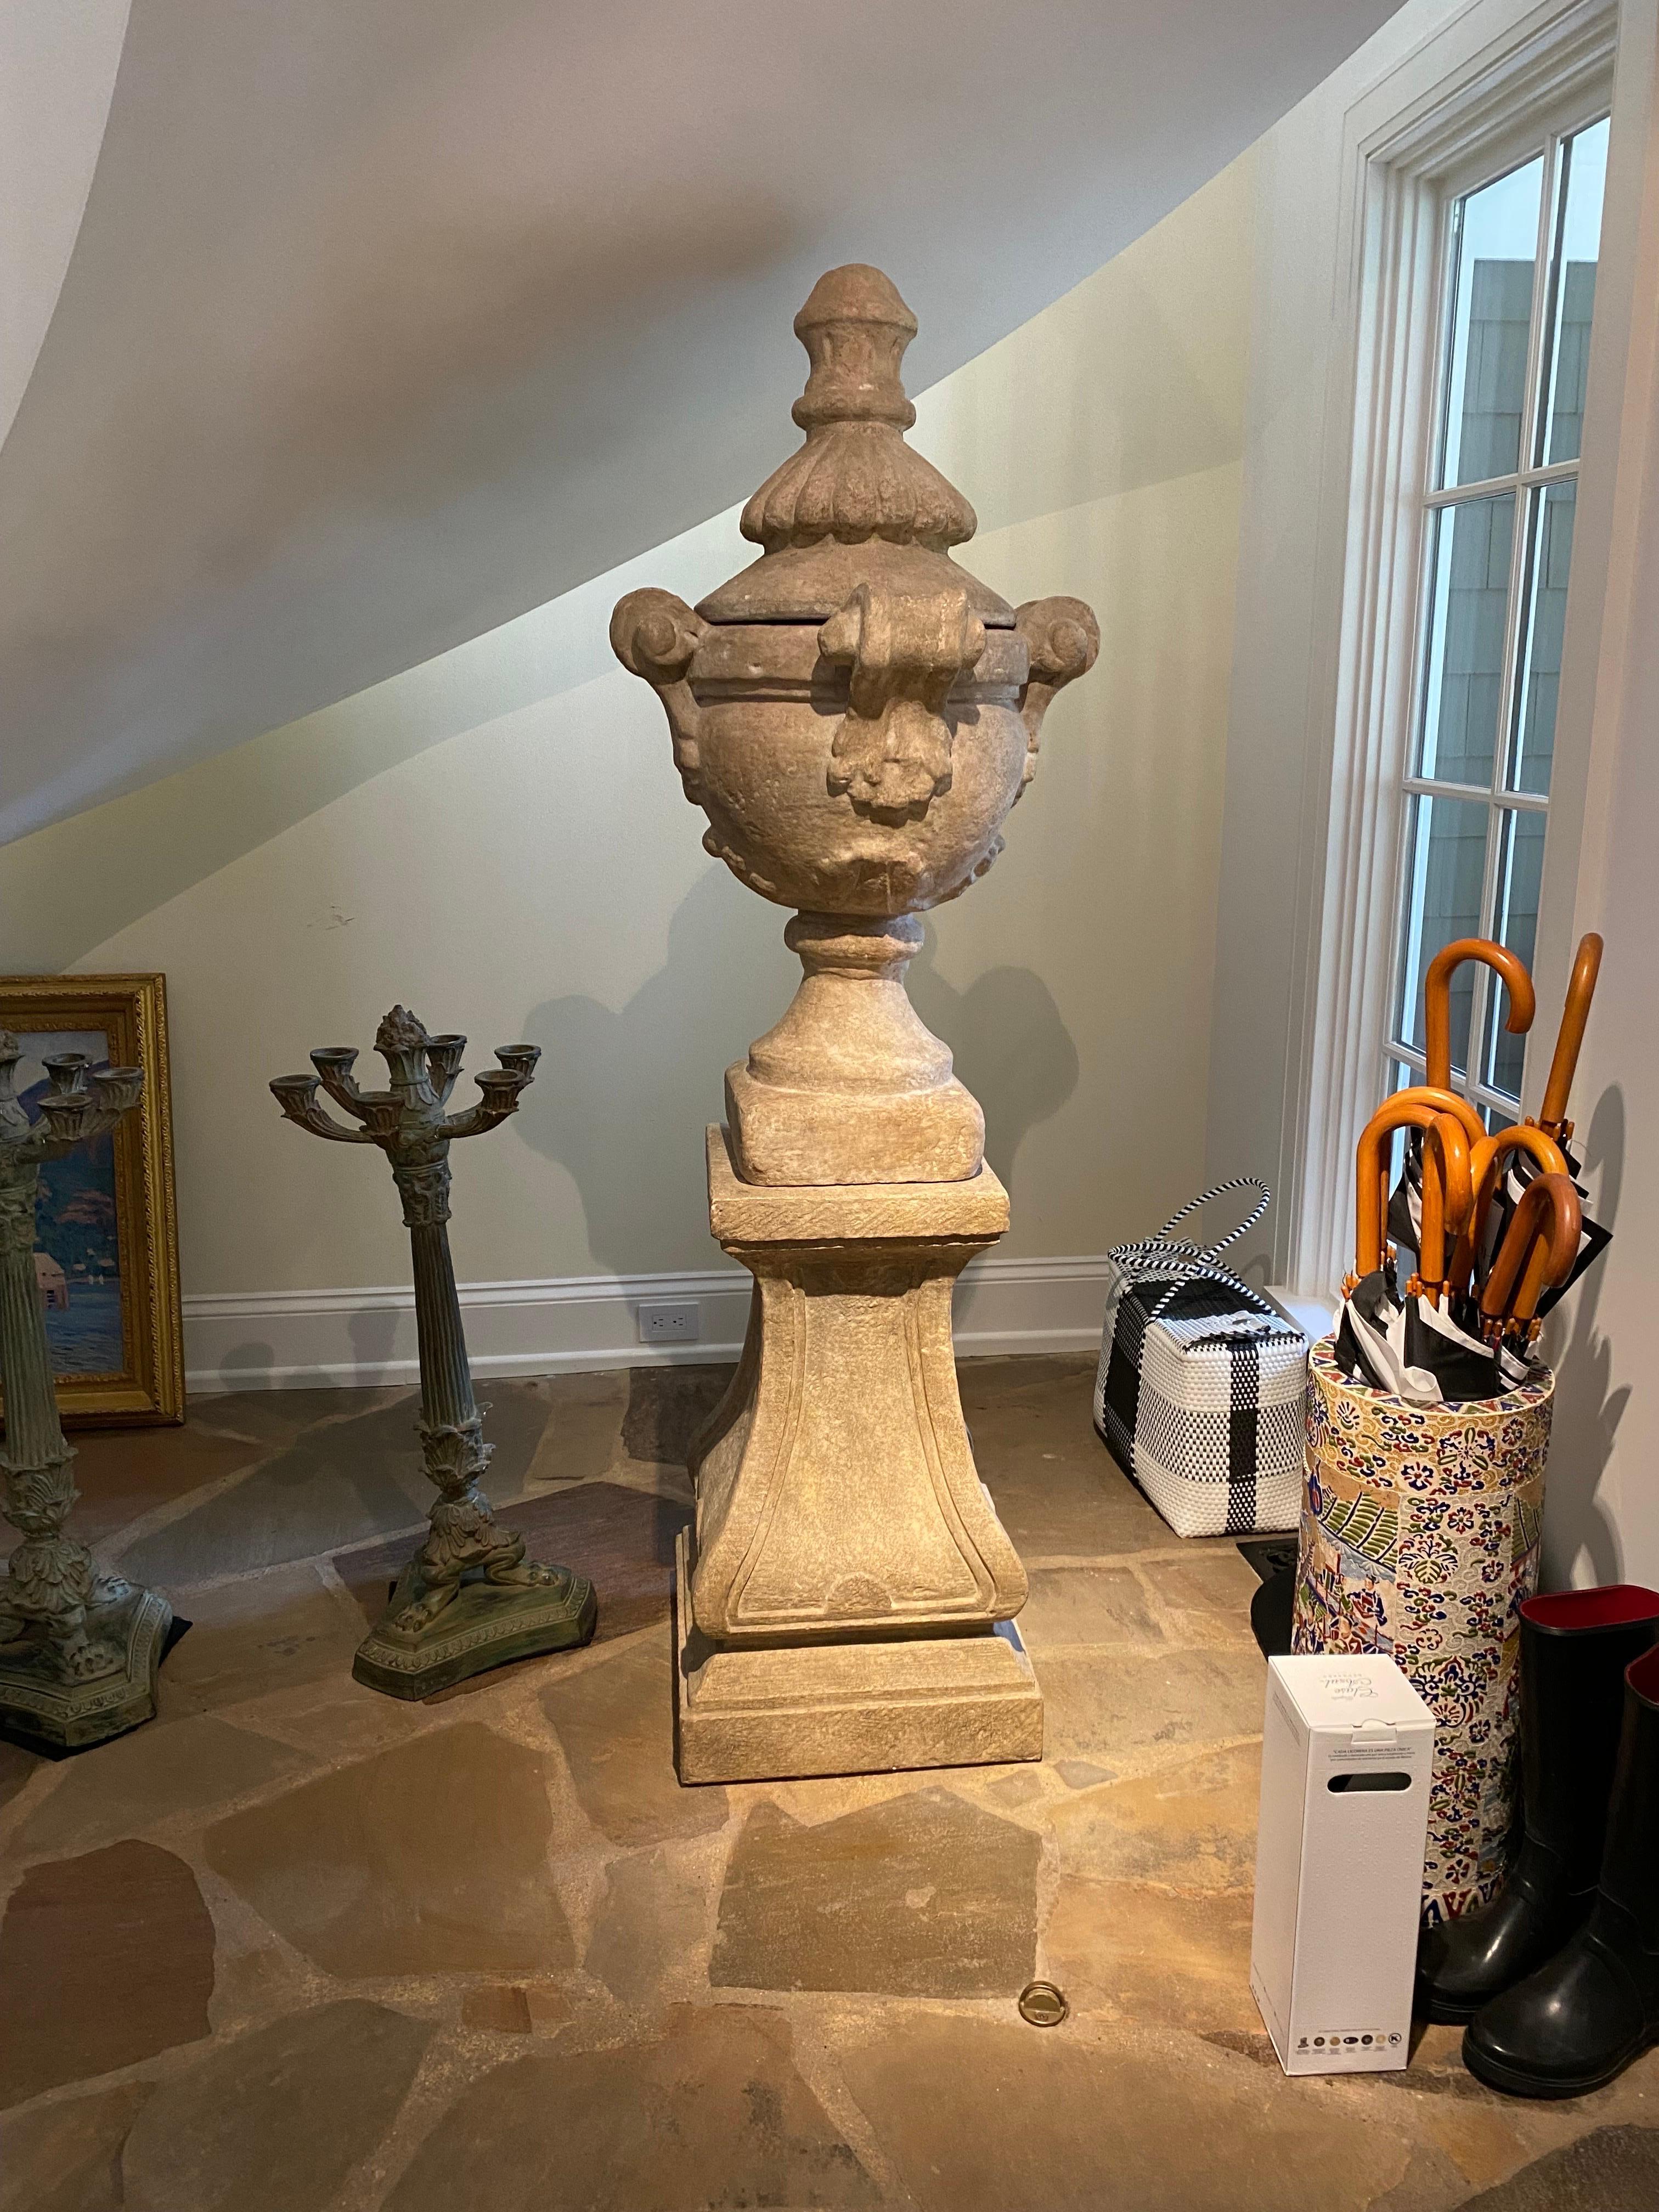 Monumental Stone Capped Urn on Pedestal, Possibly French, 20th Century
Measuring 71